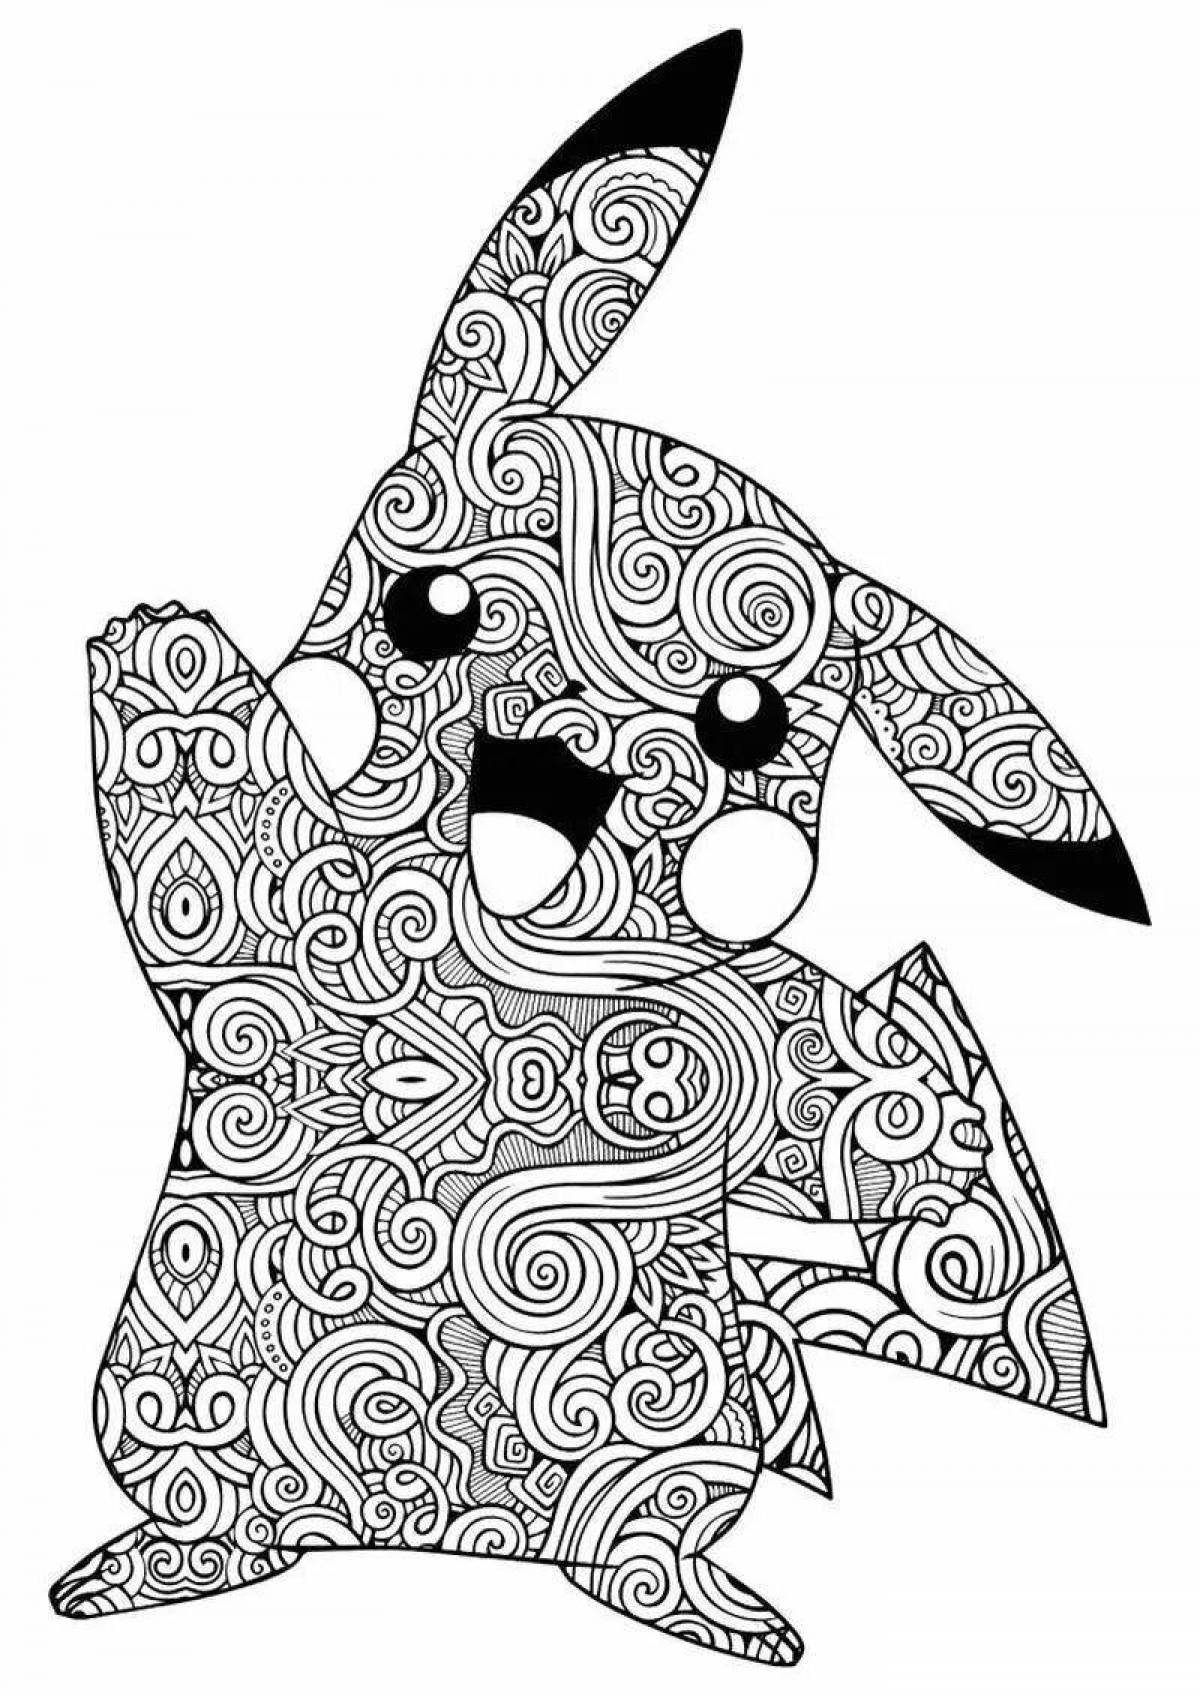 Exciting pikachu antistress coloring book